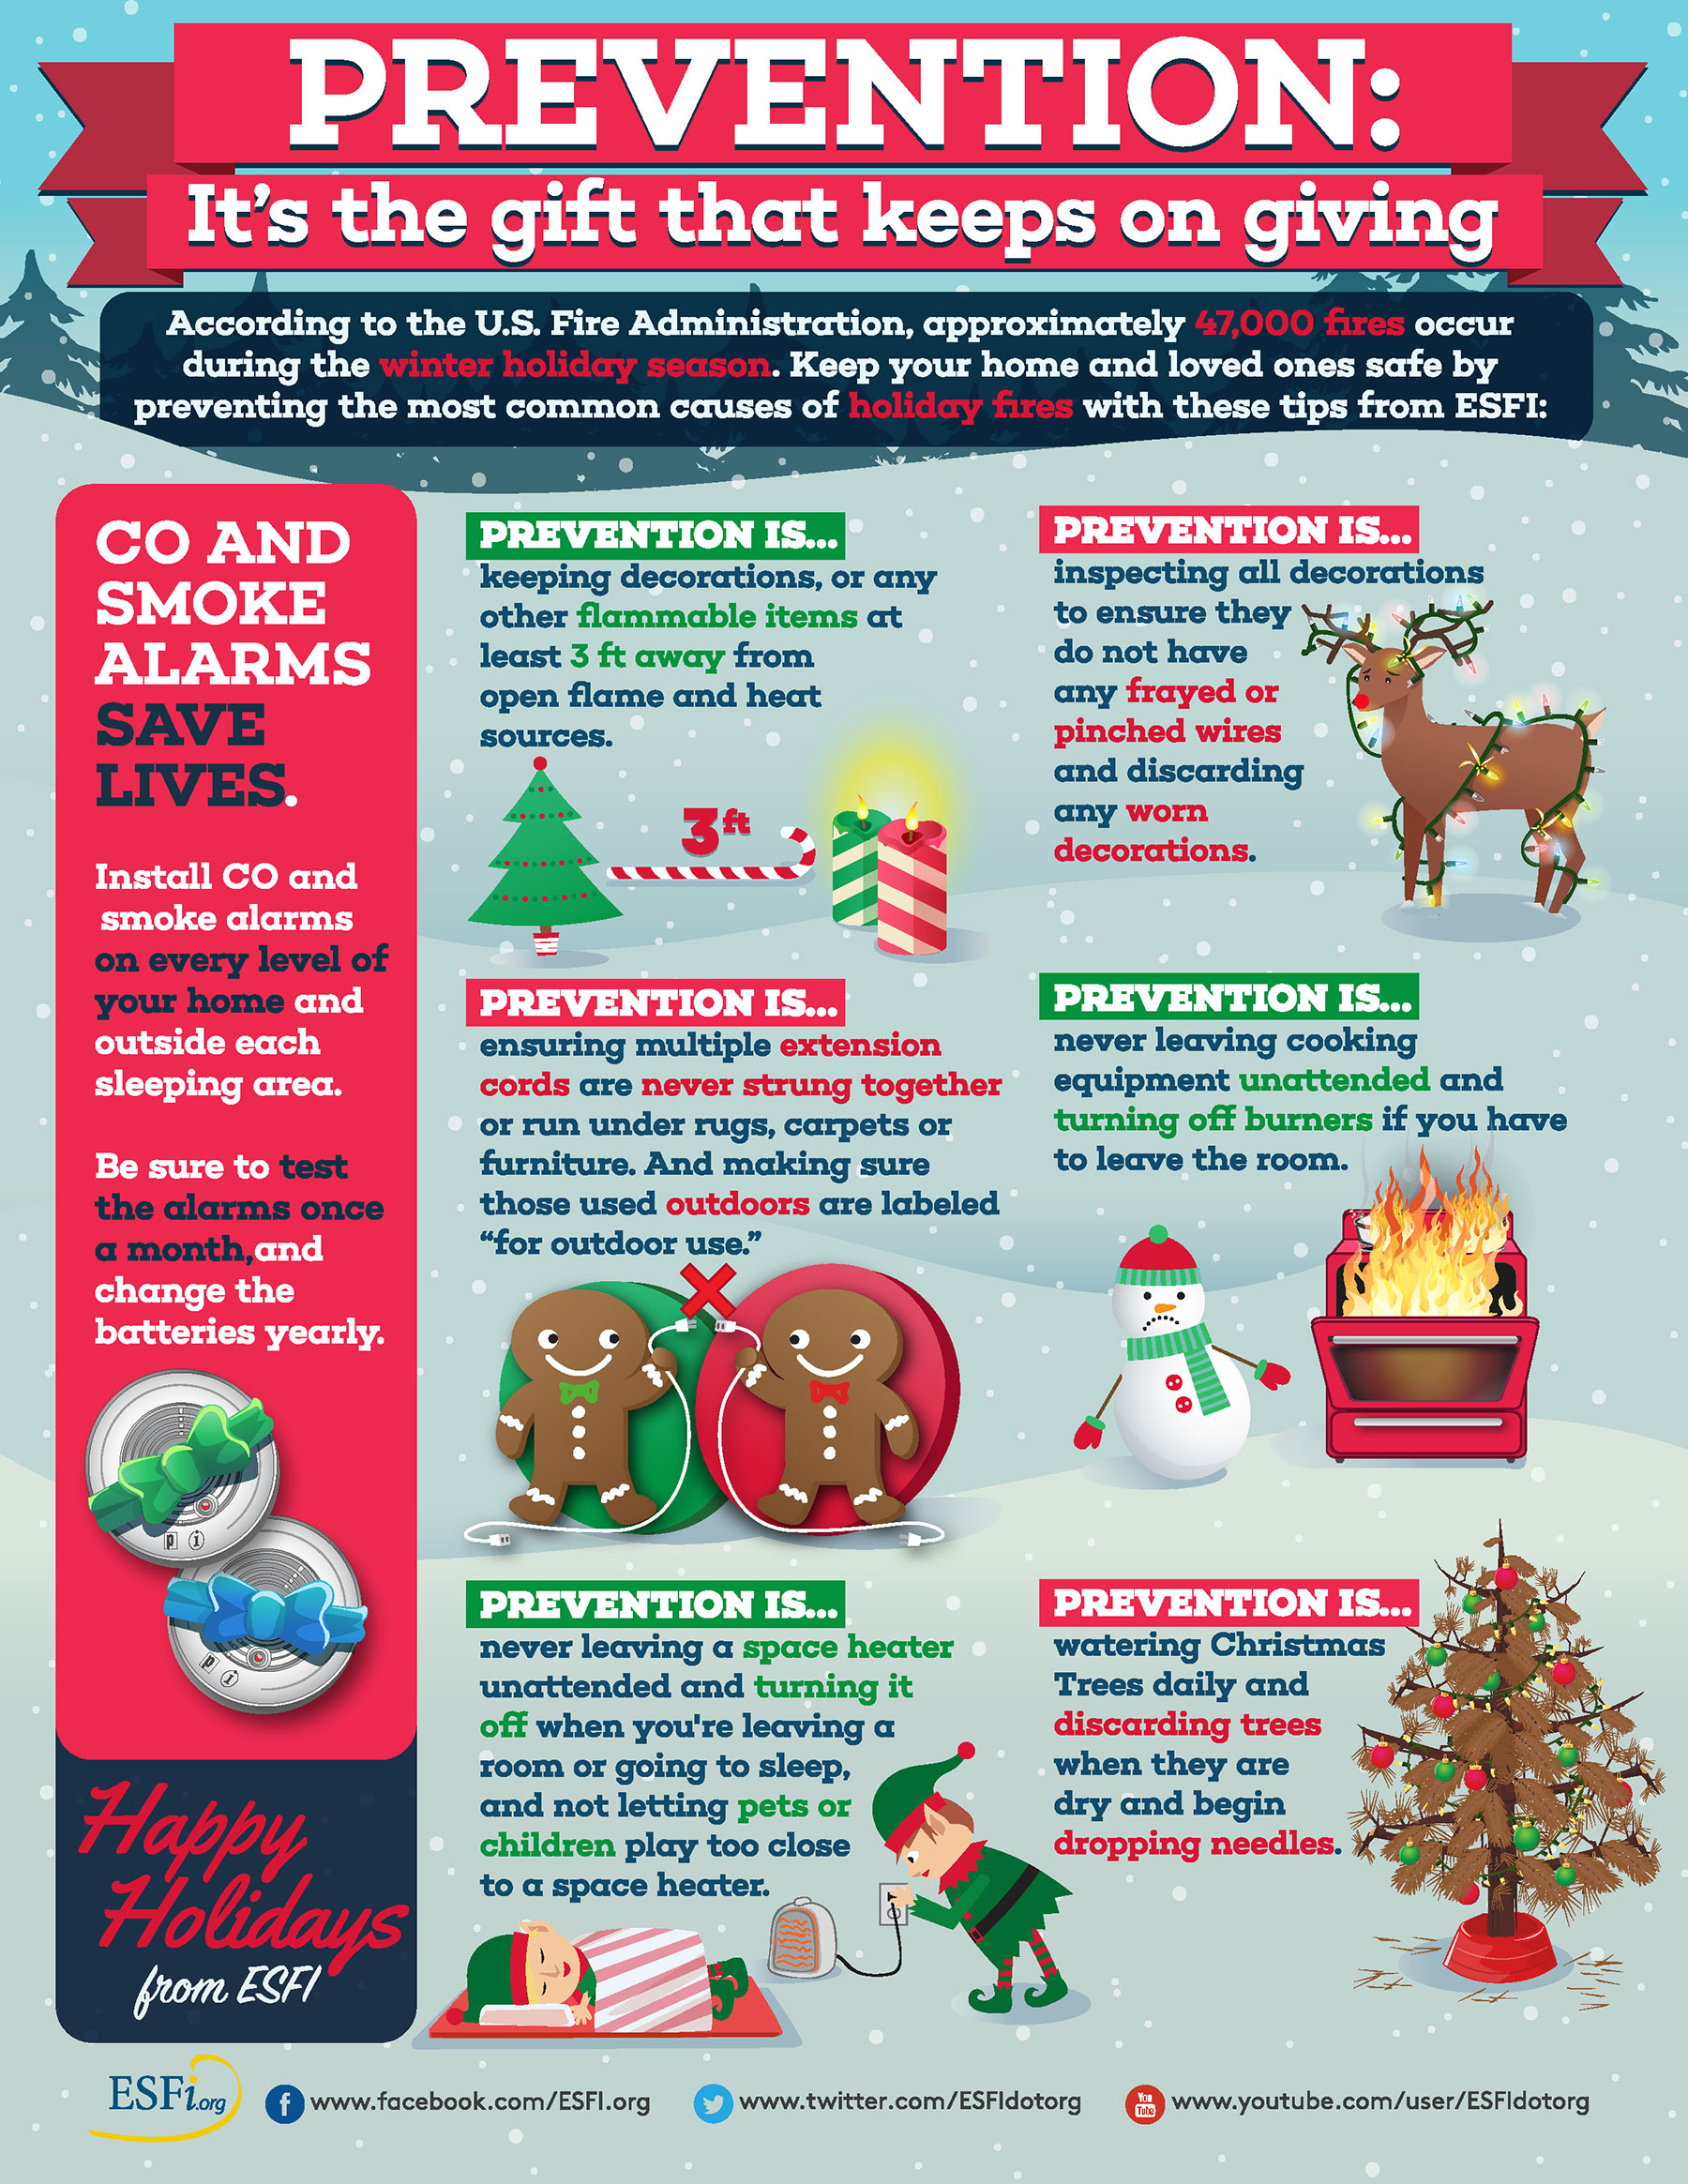 Holiday Safety Infographic